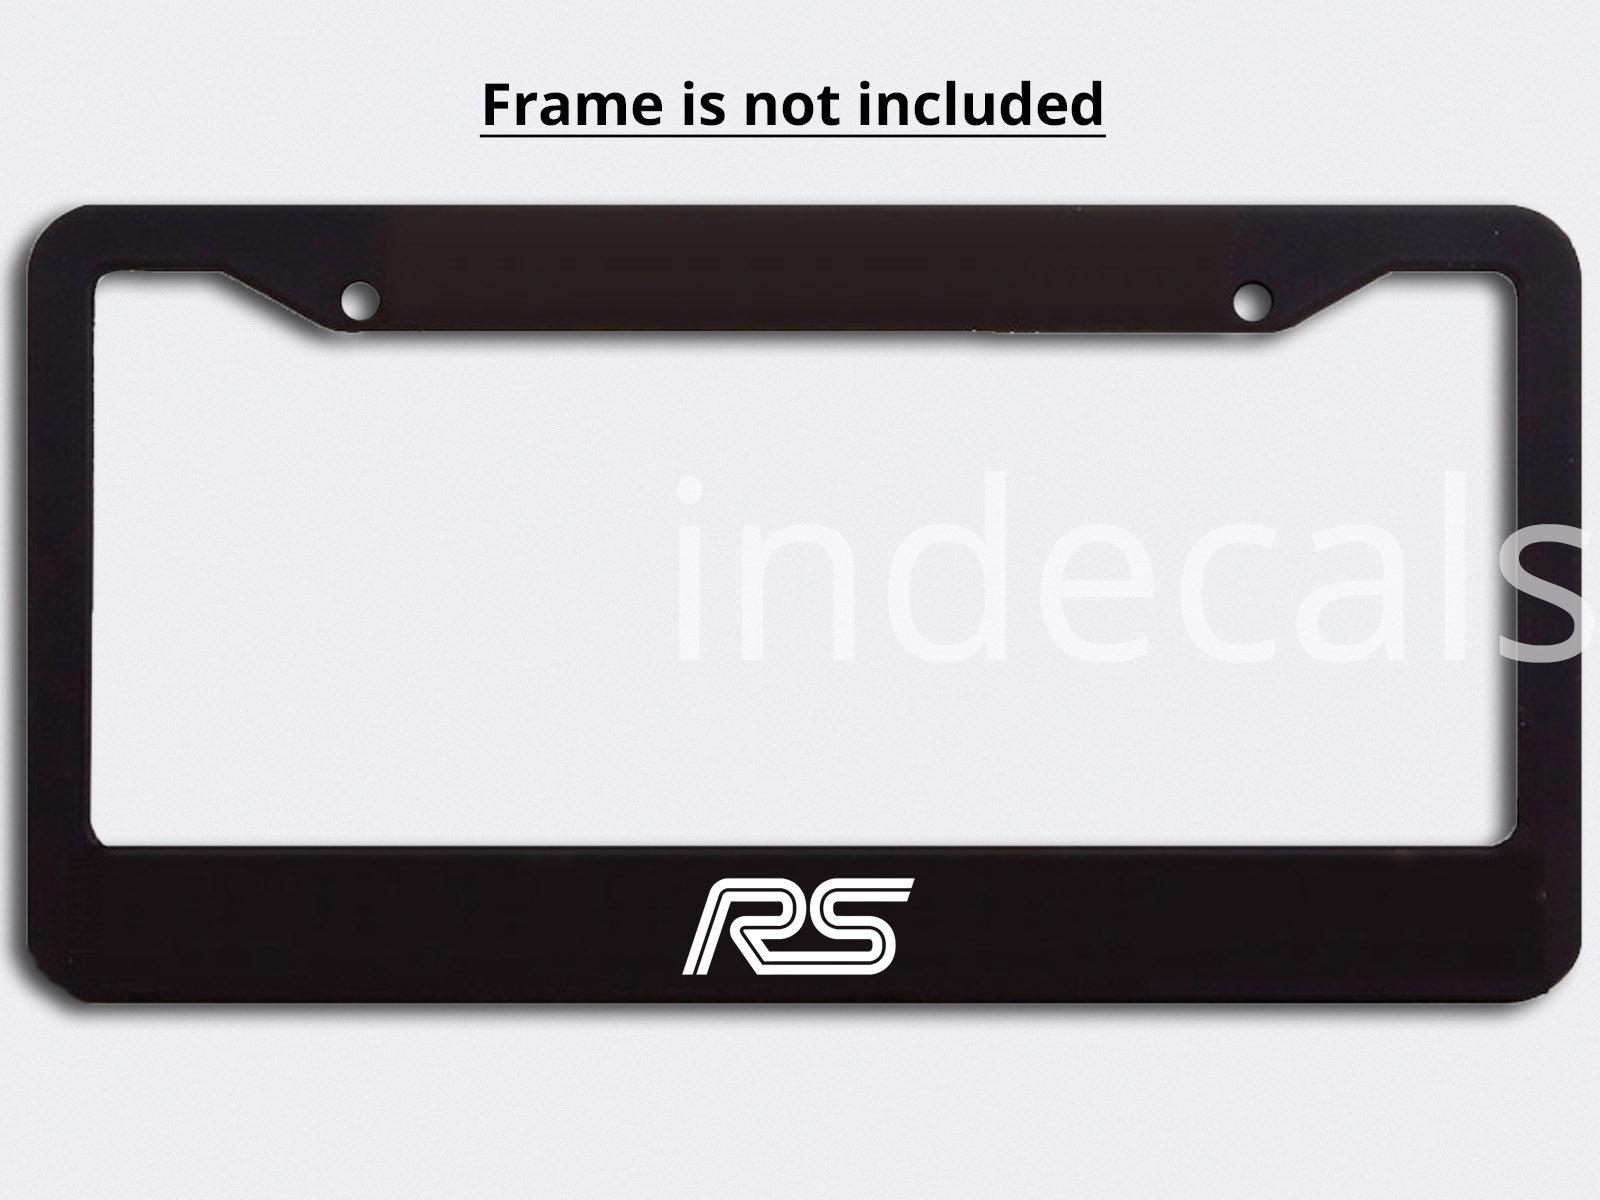 3 x Ford RS Stickers for License Plate Frame - White